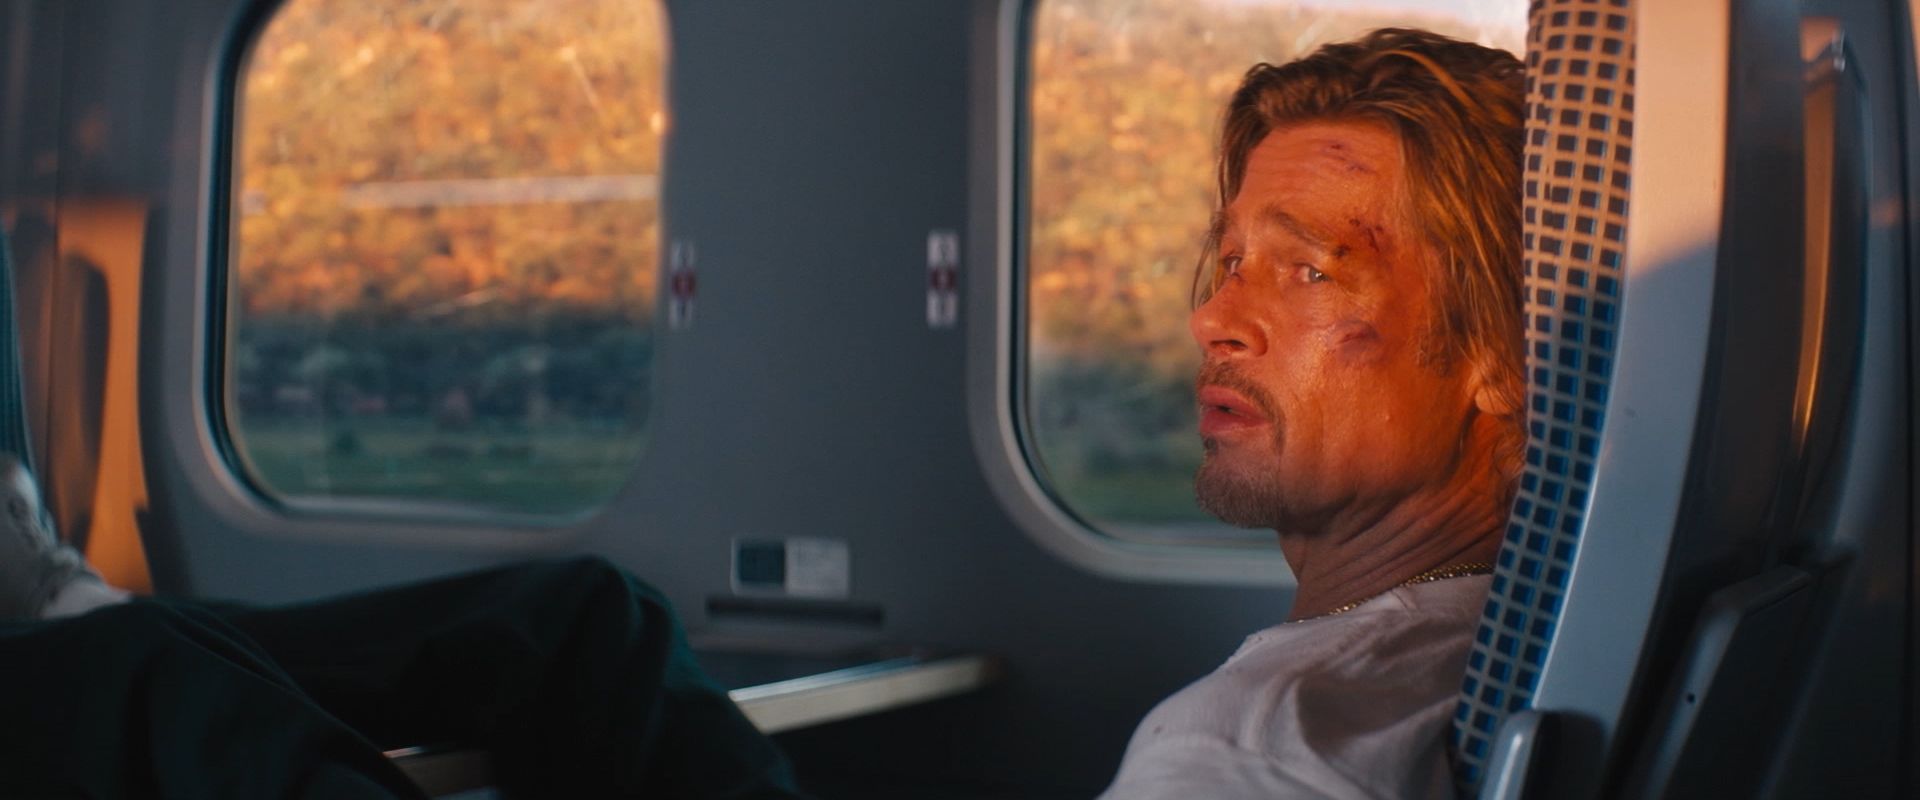 Brad Pitt's action movie Bullet Train gets first reactions